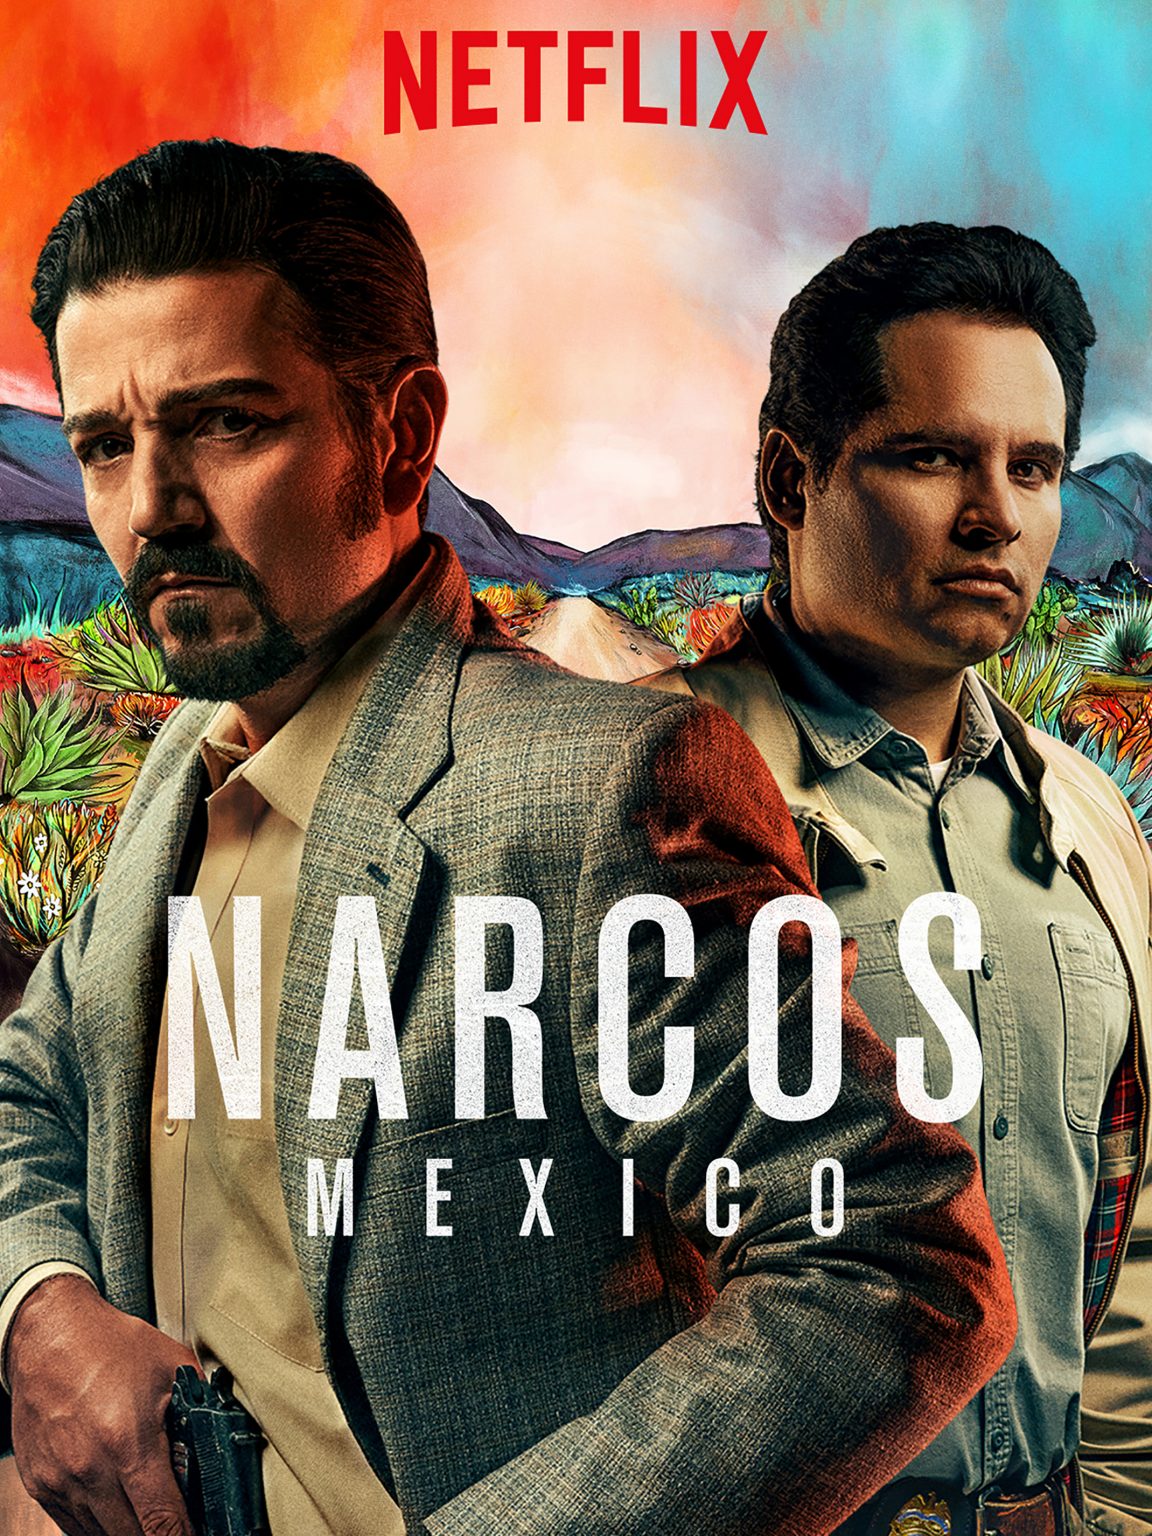 Narcos Mexico season 2 , Release date, Cast Details, Recap and